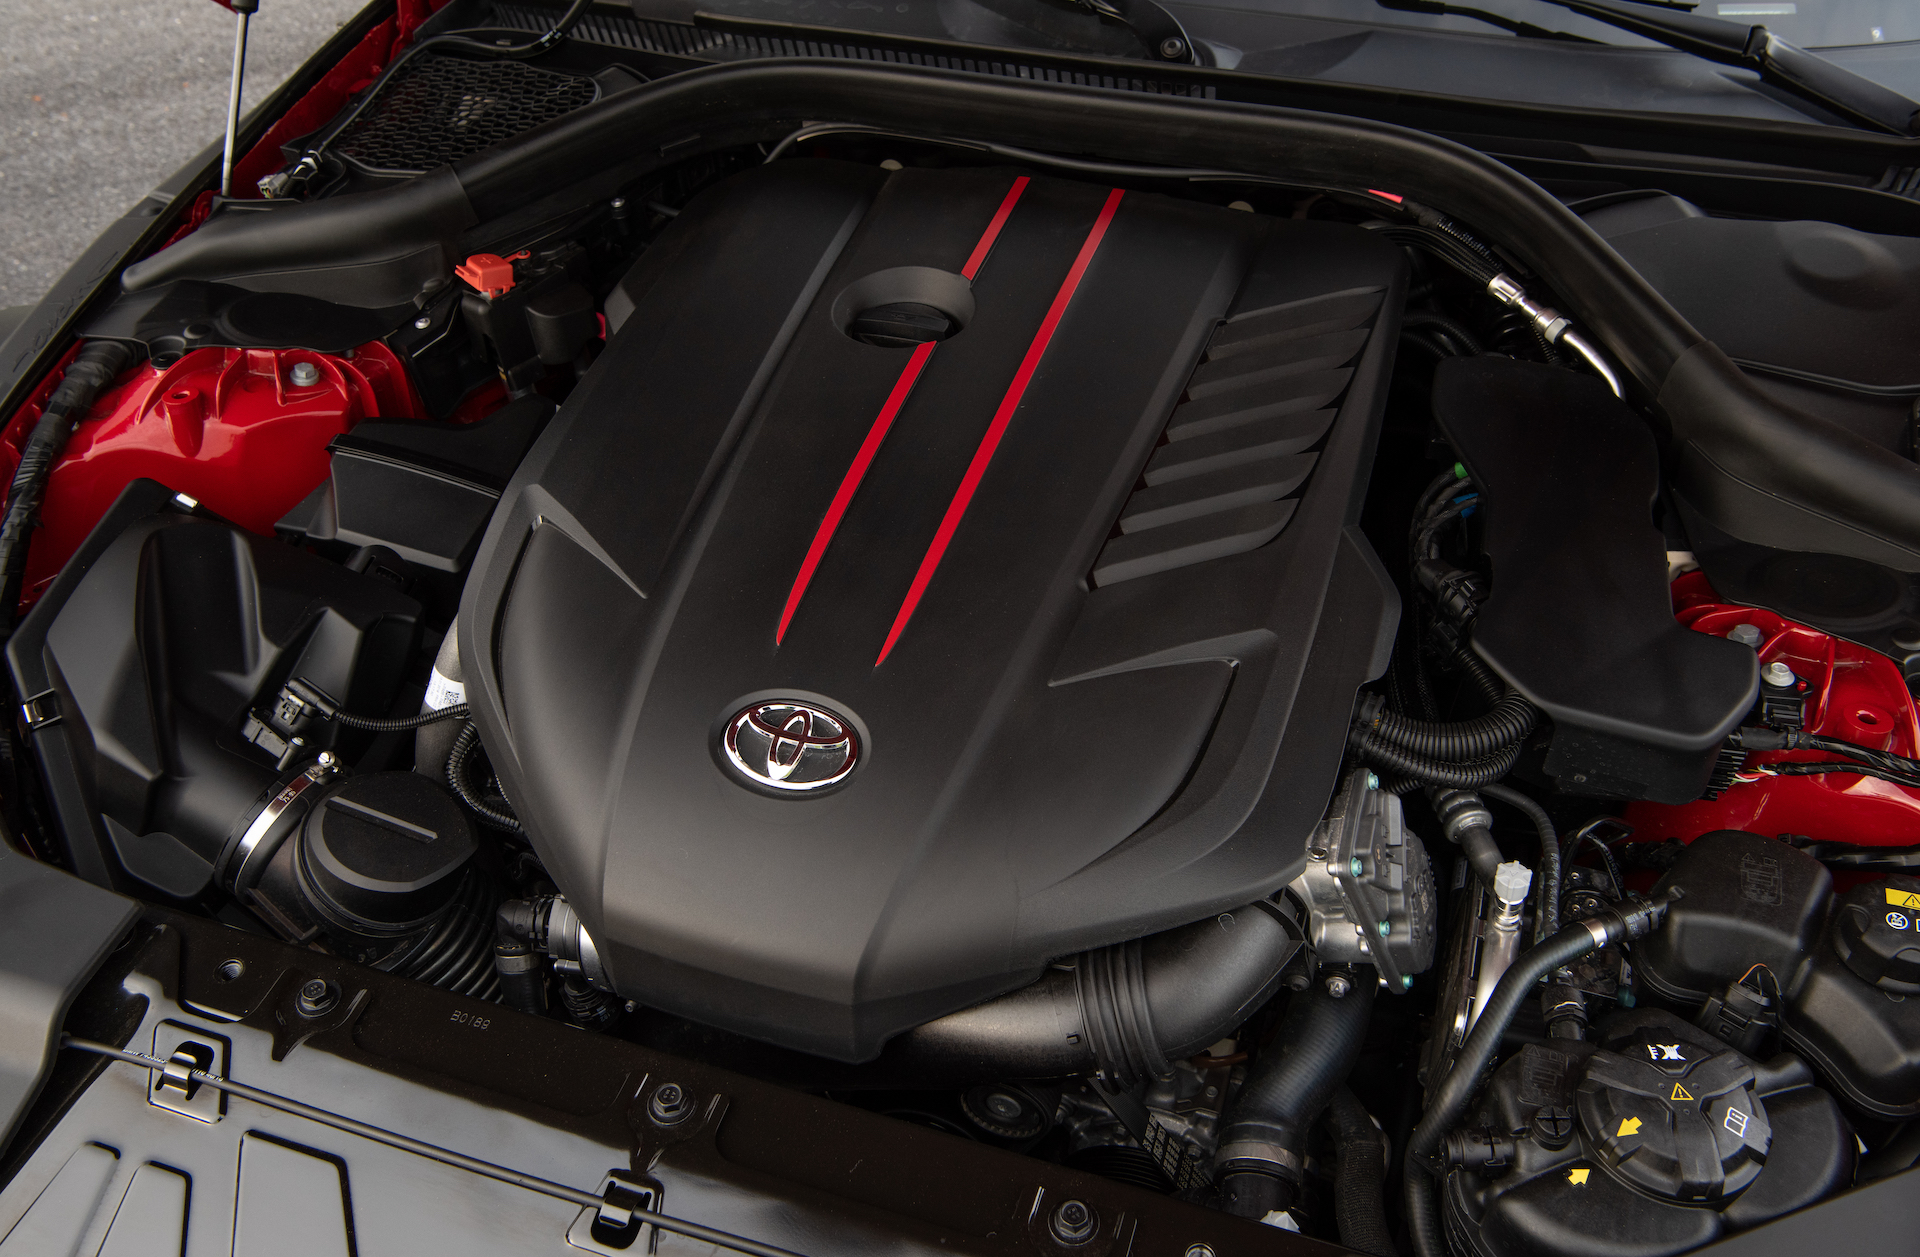  Engine  expert thinks 2020 Toyota  Supra  could handle 1 000 